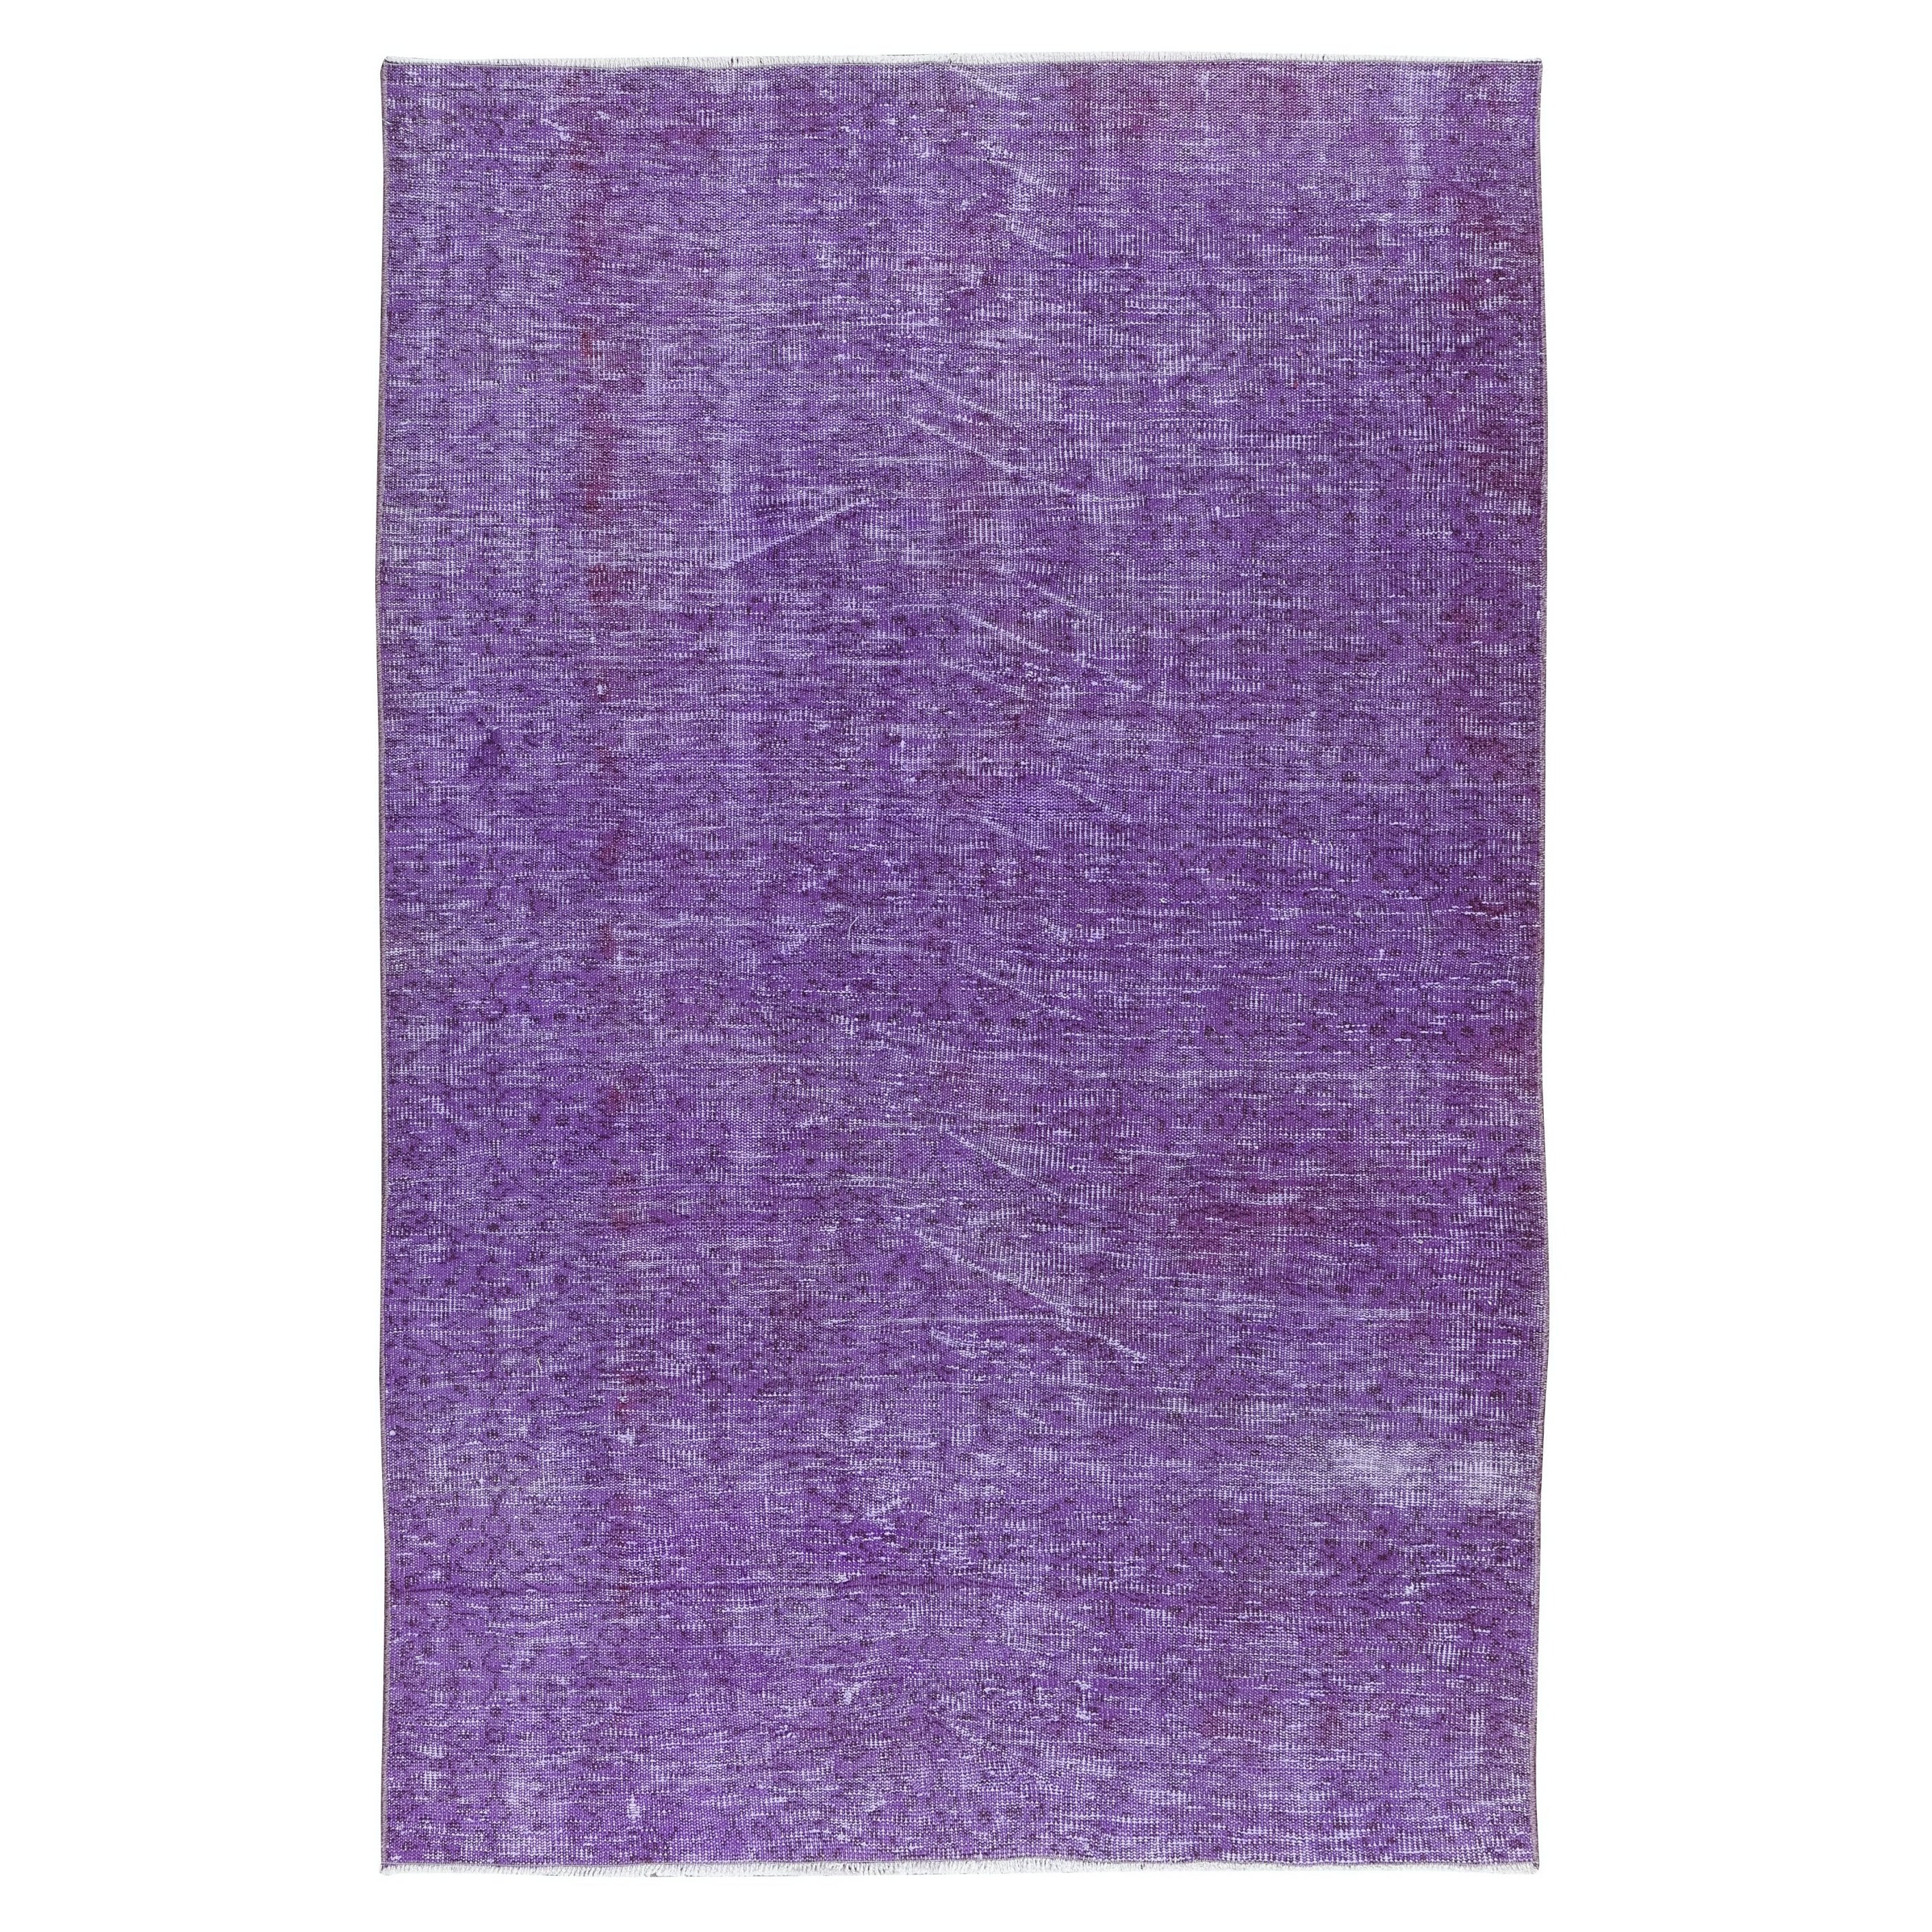 4.8x7.5 Ft Royal Purple Handknotted Room Size Area Rug. Modern Turkish Carpet For Sale